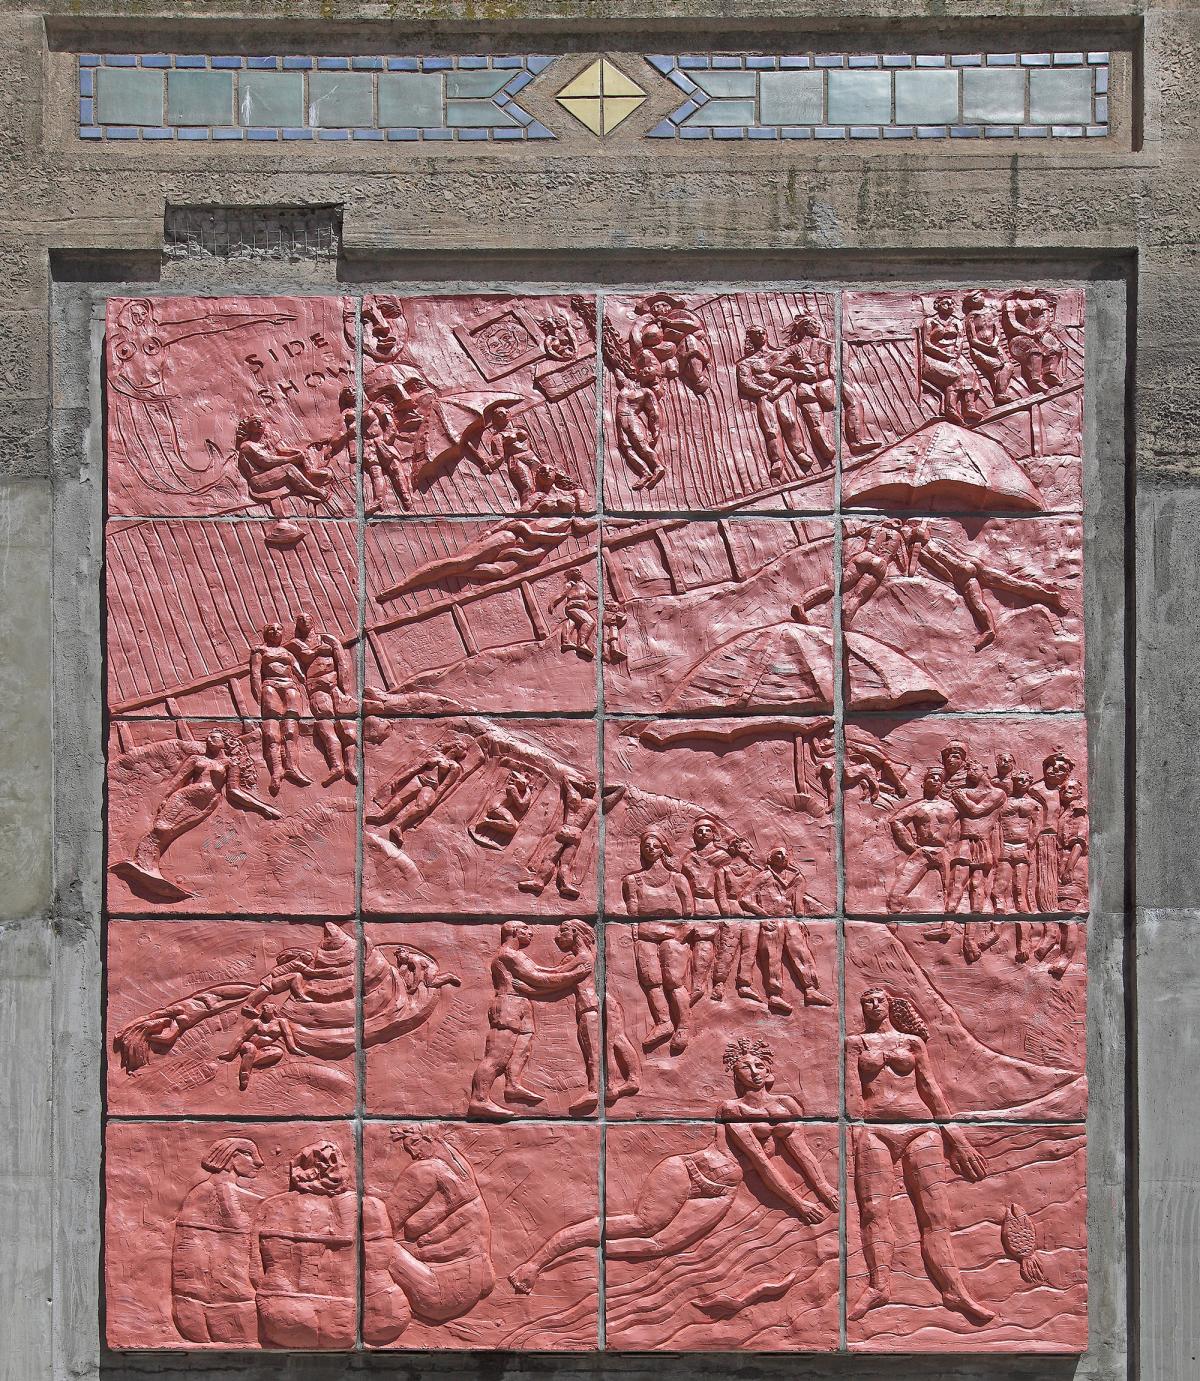 Artwork in terracotta colored cast concrete by Deborah Masters showing scenes from Coney Island.